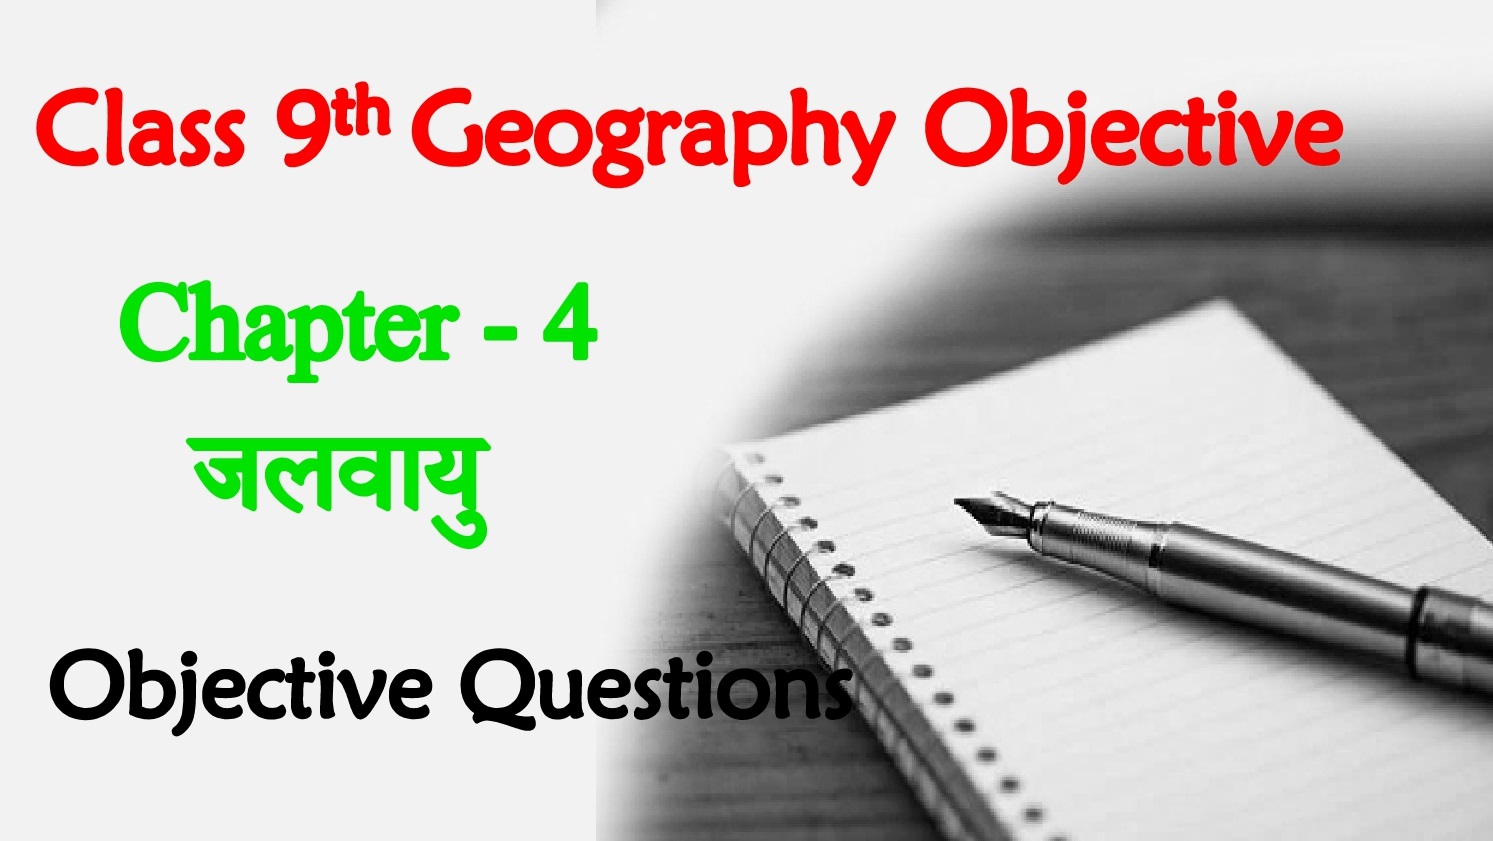 Jalvayu Class 9th Objective Questions